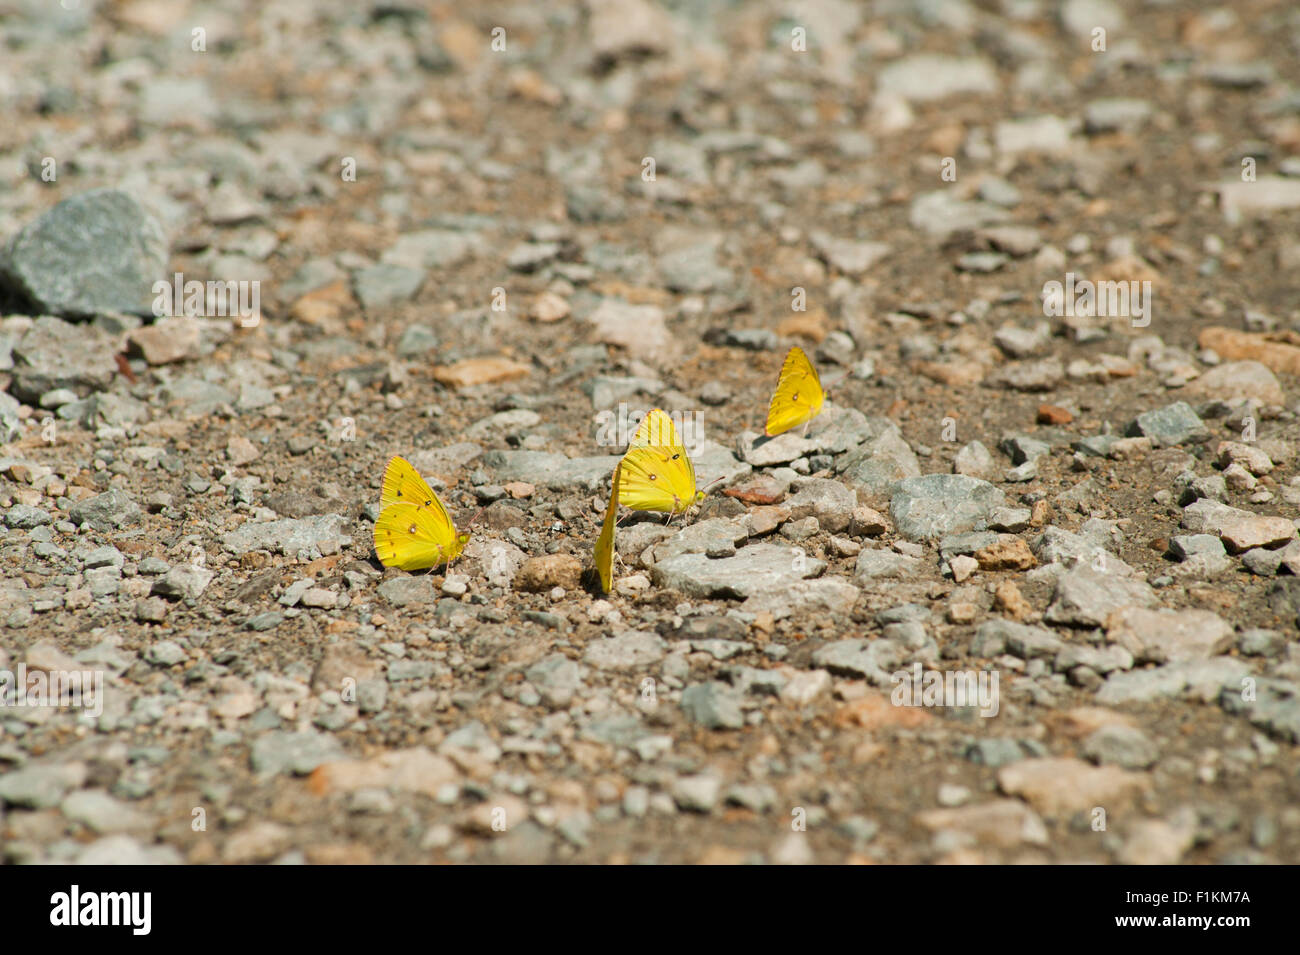 Mud-puddling (puddling) 'Little Yellow Sulphur' butterflies searching for water on damp road during a drought in Indiana. Stock Photo